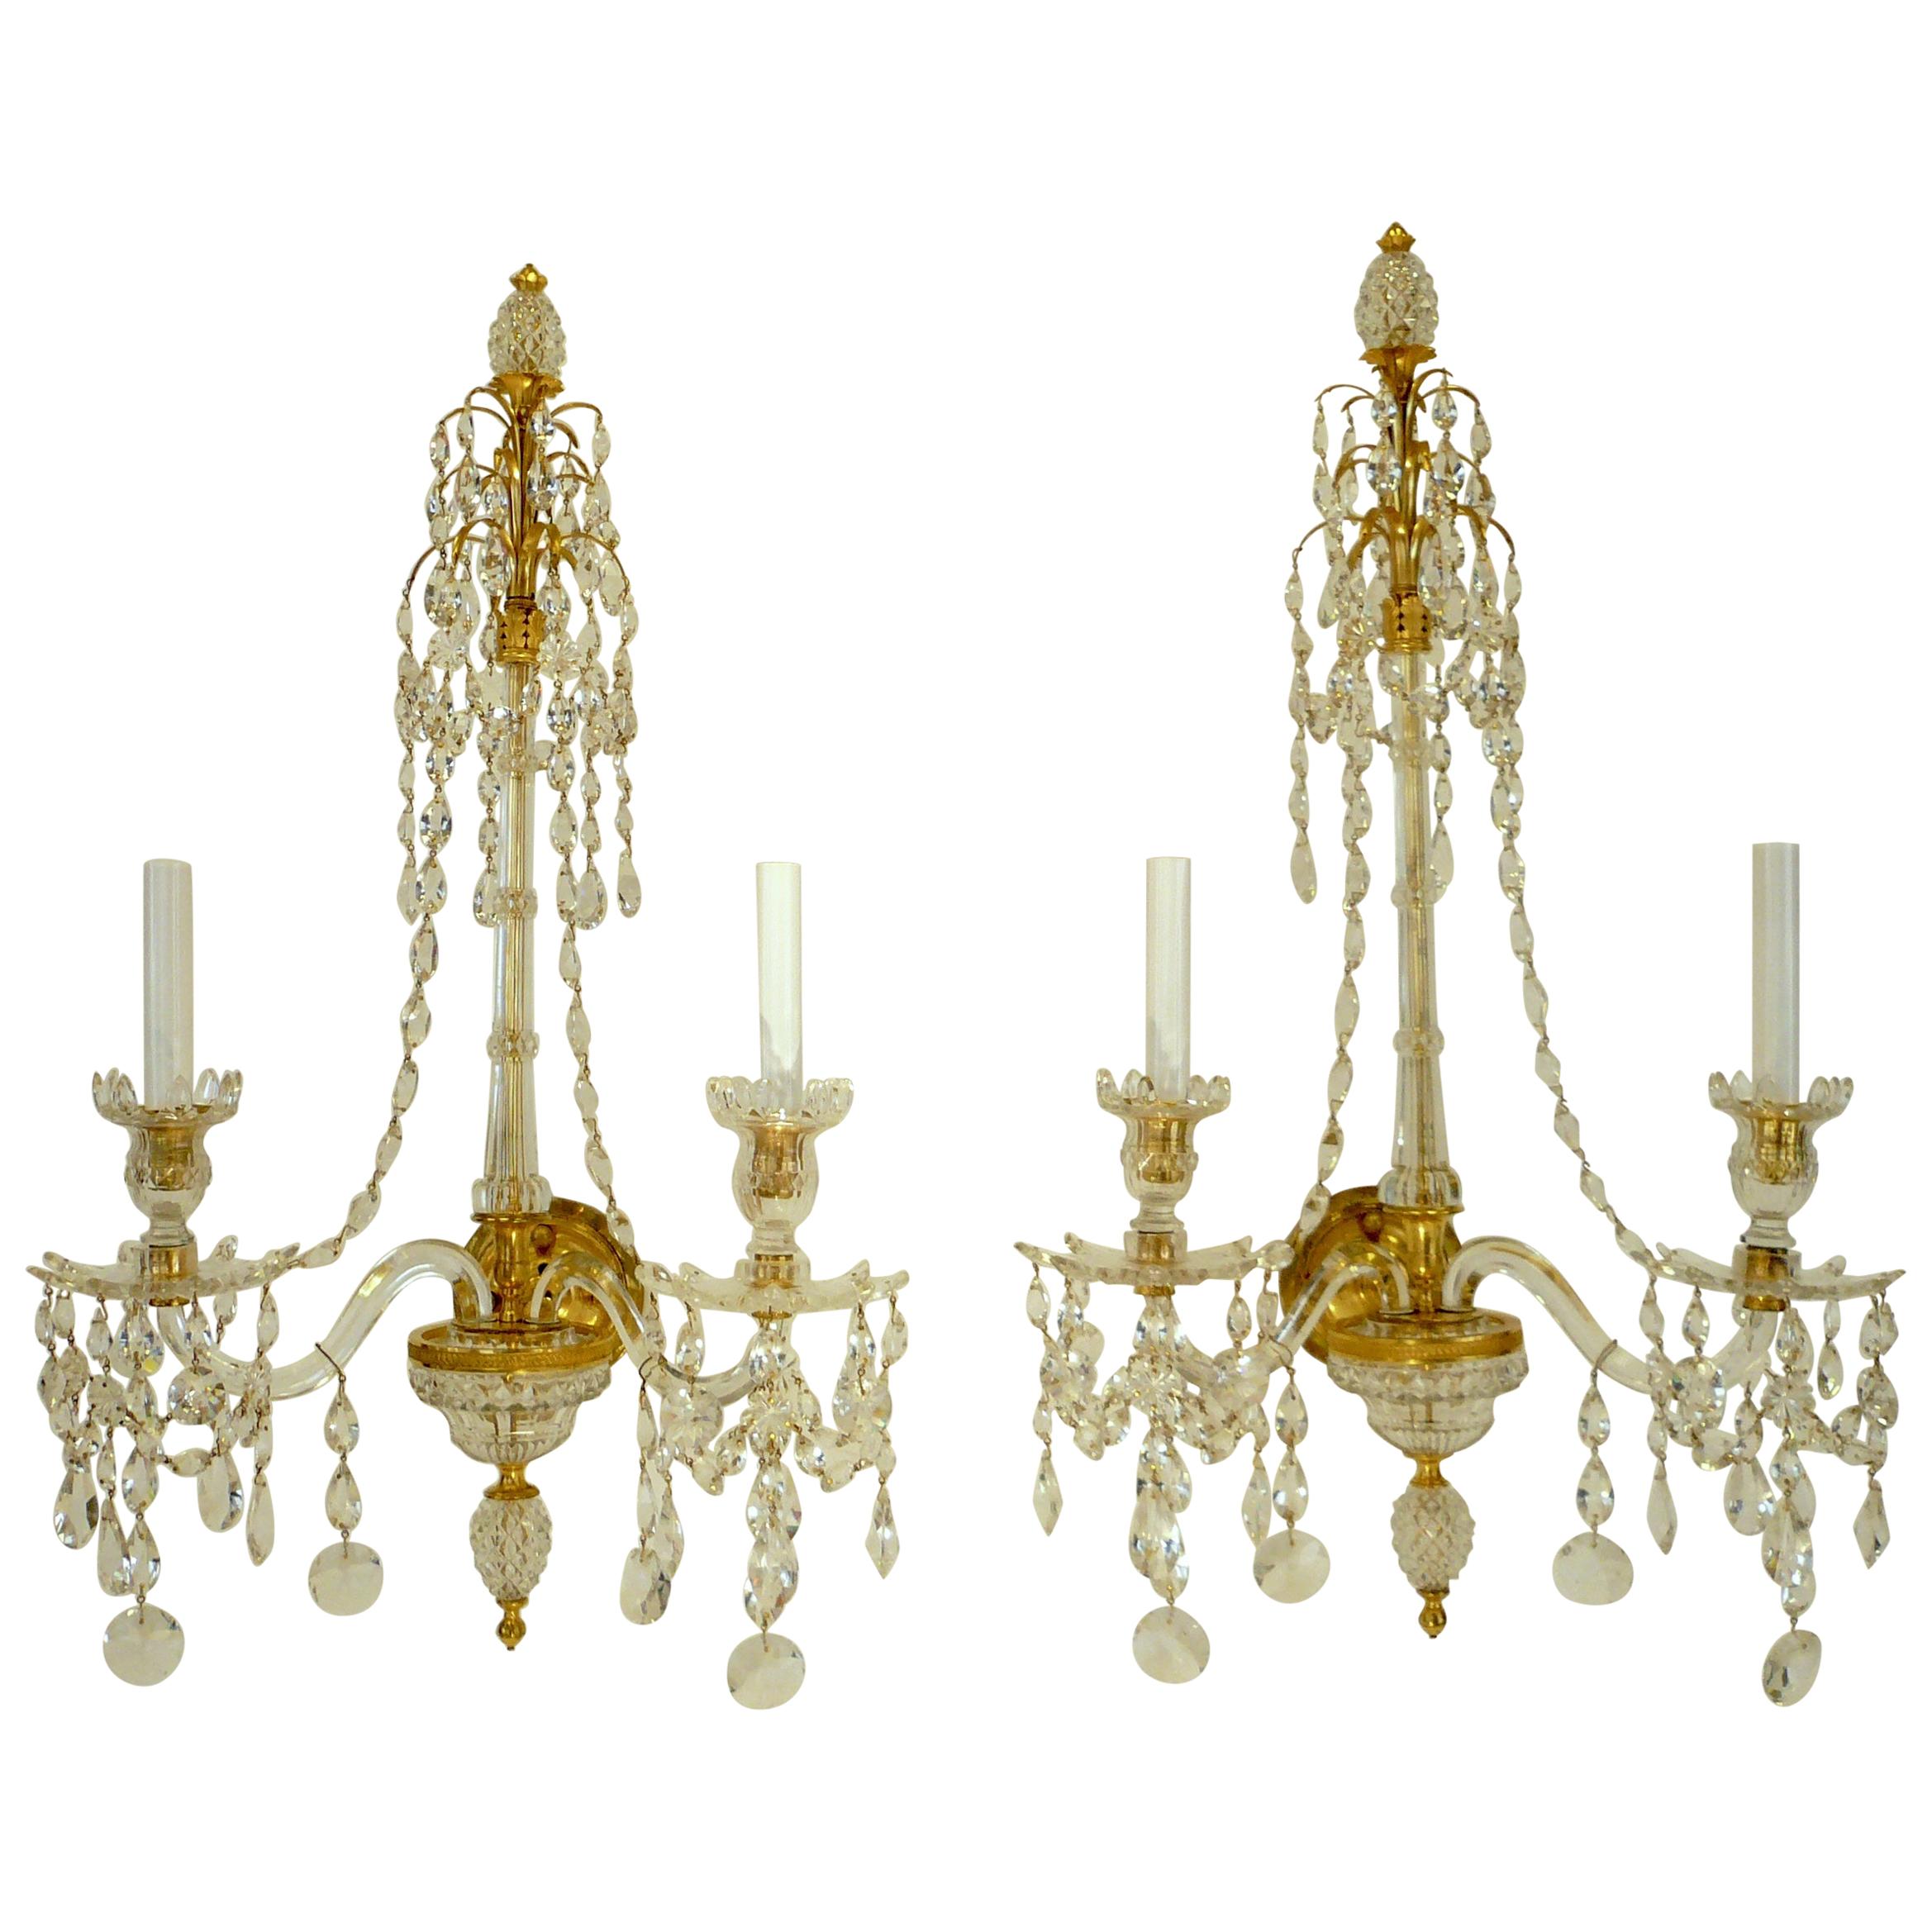 Exquisite Pair of Georgian Sconces in the Adam Style, Attributed to Wm. Parker